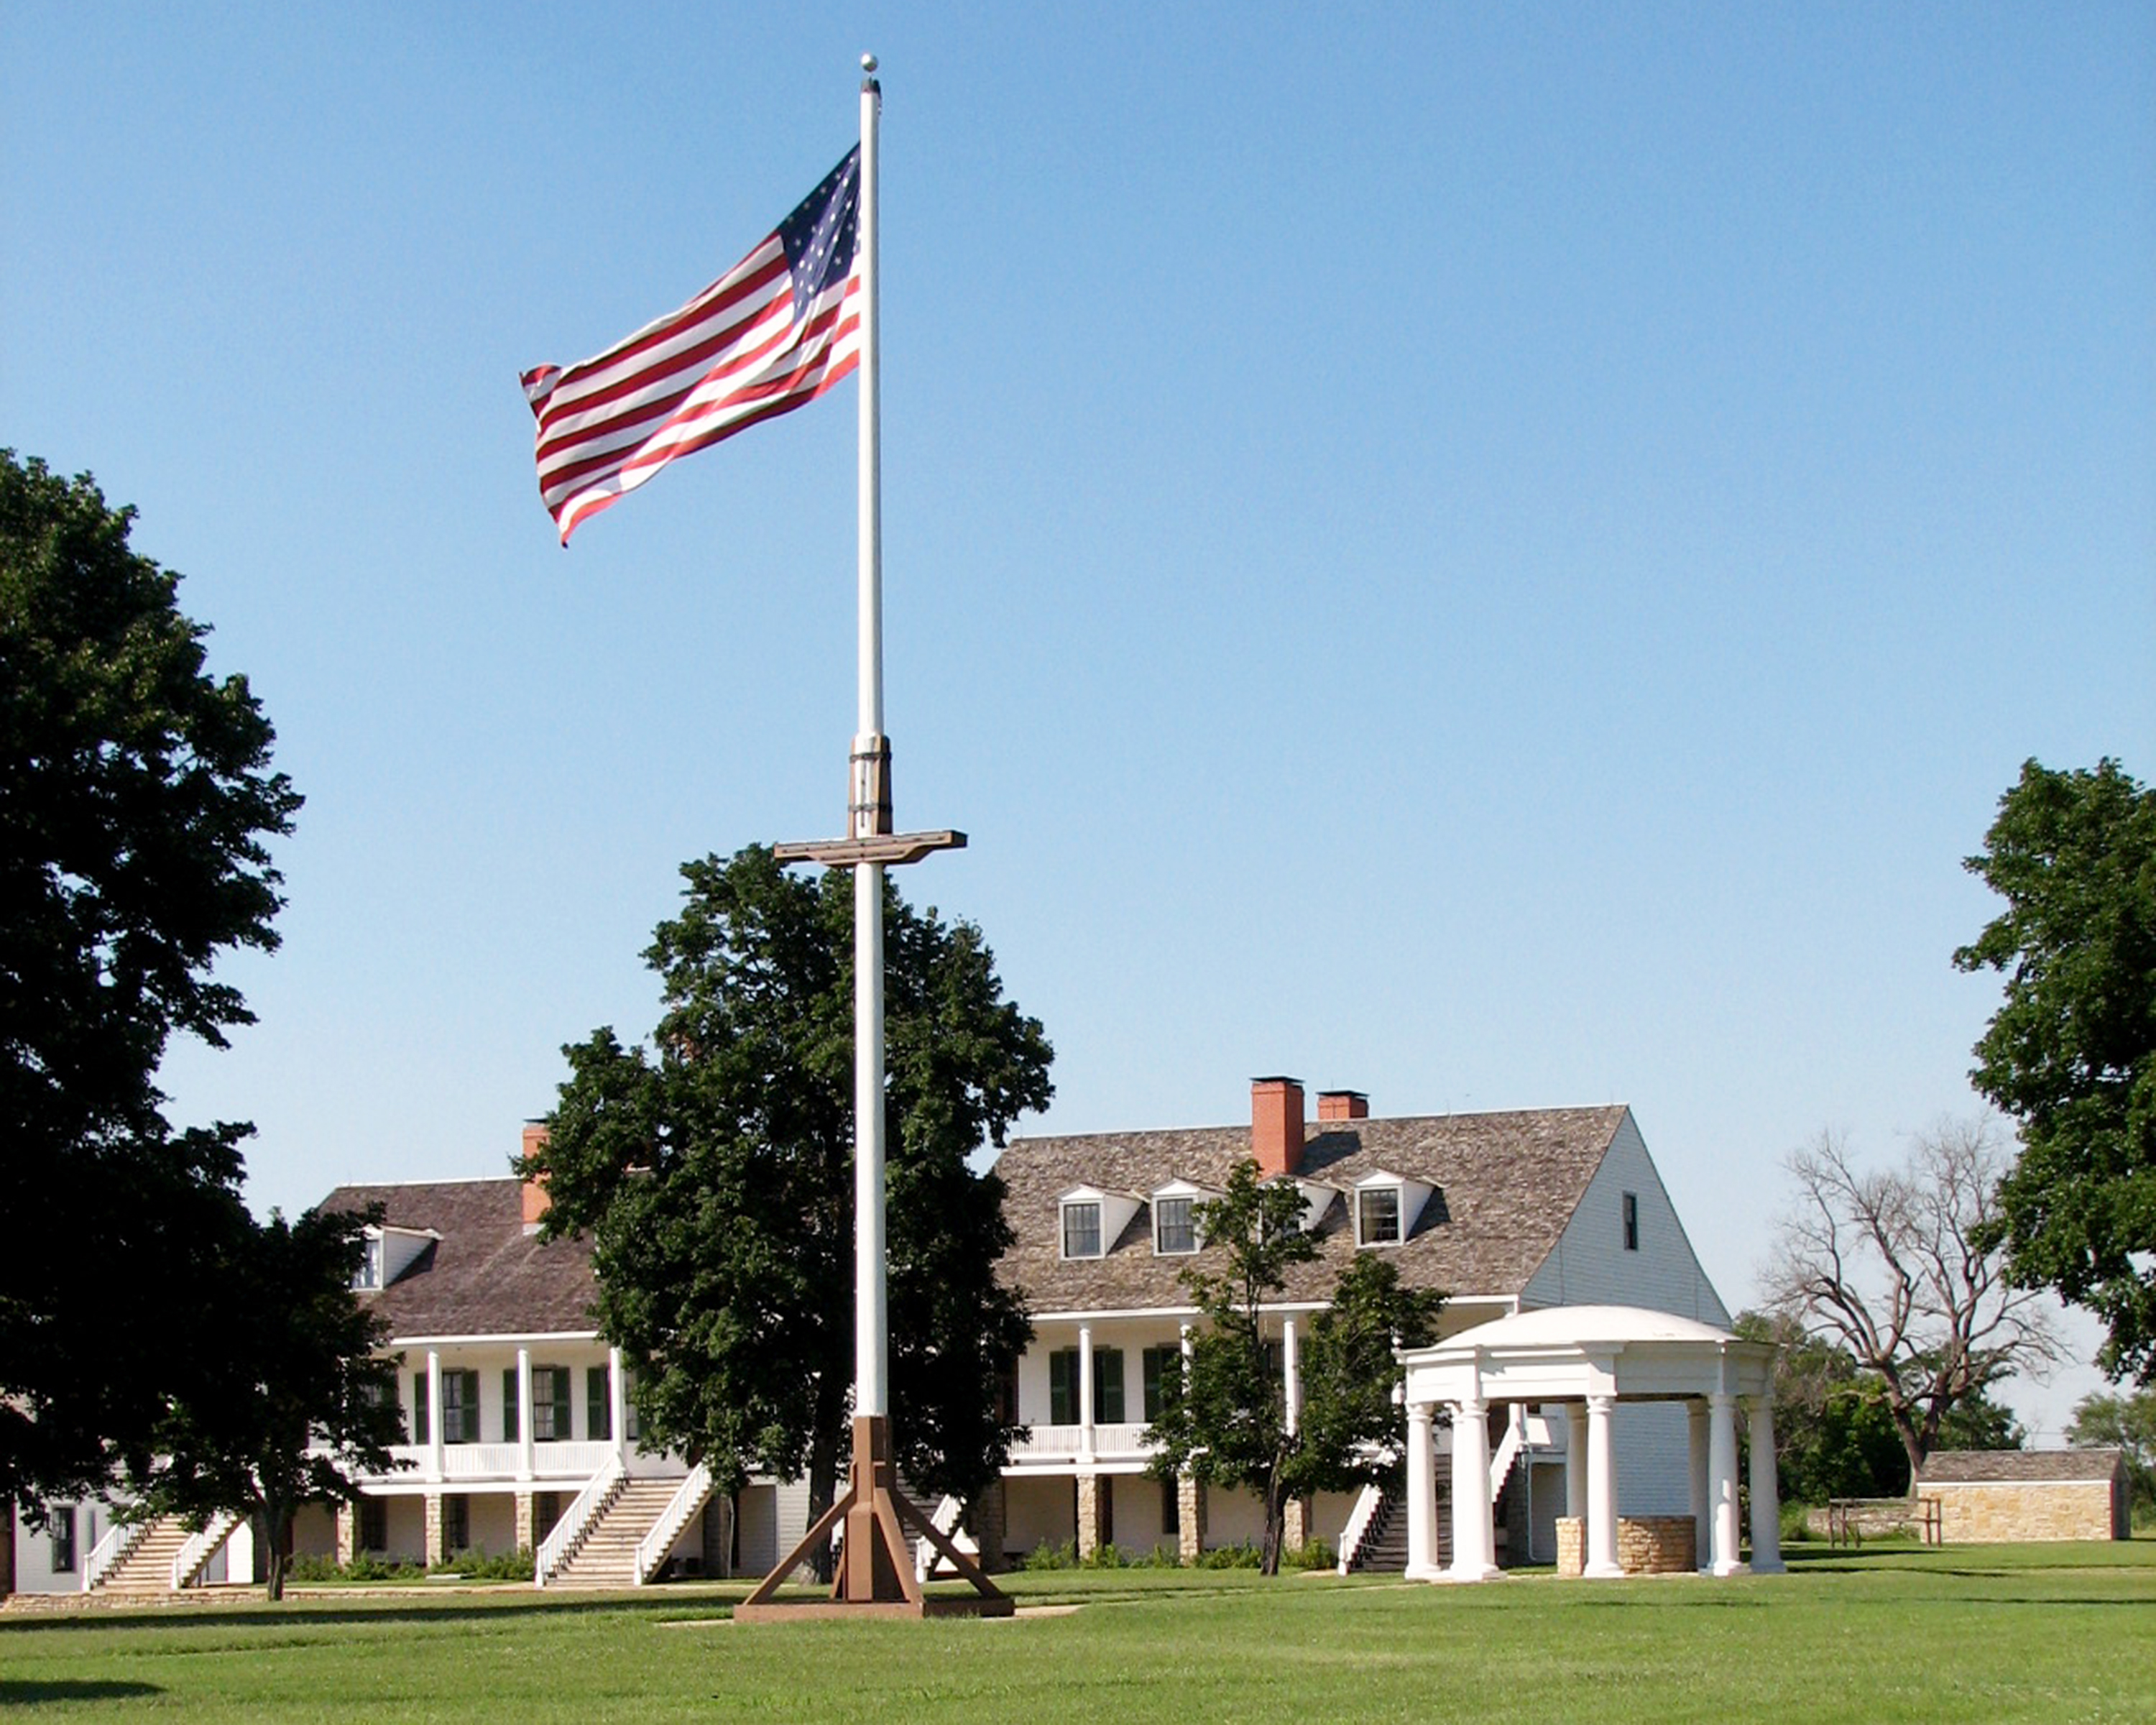 Picture of Fort Scott's parade ground with historic white buildings in the background and the 1848 American flag flying on the flagpole in the center.